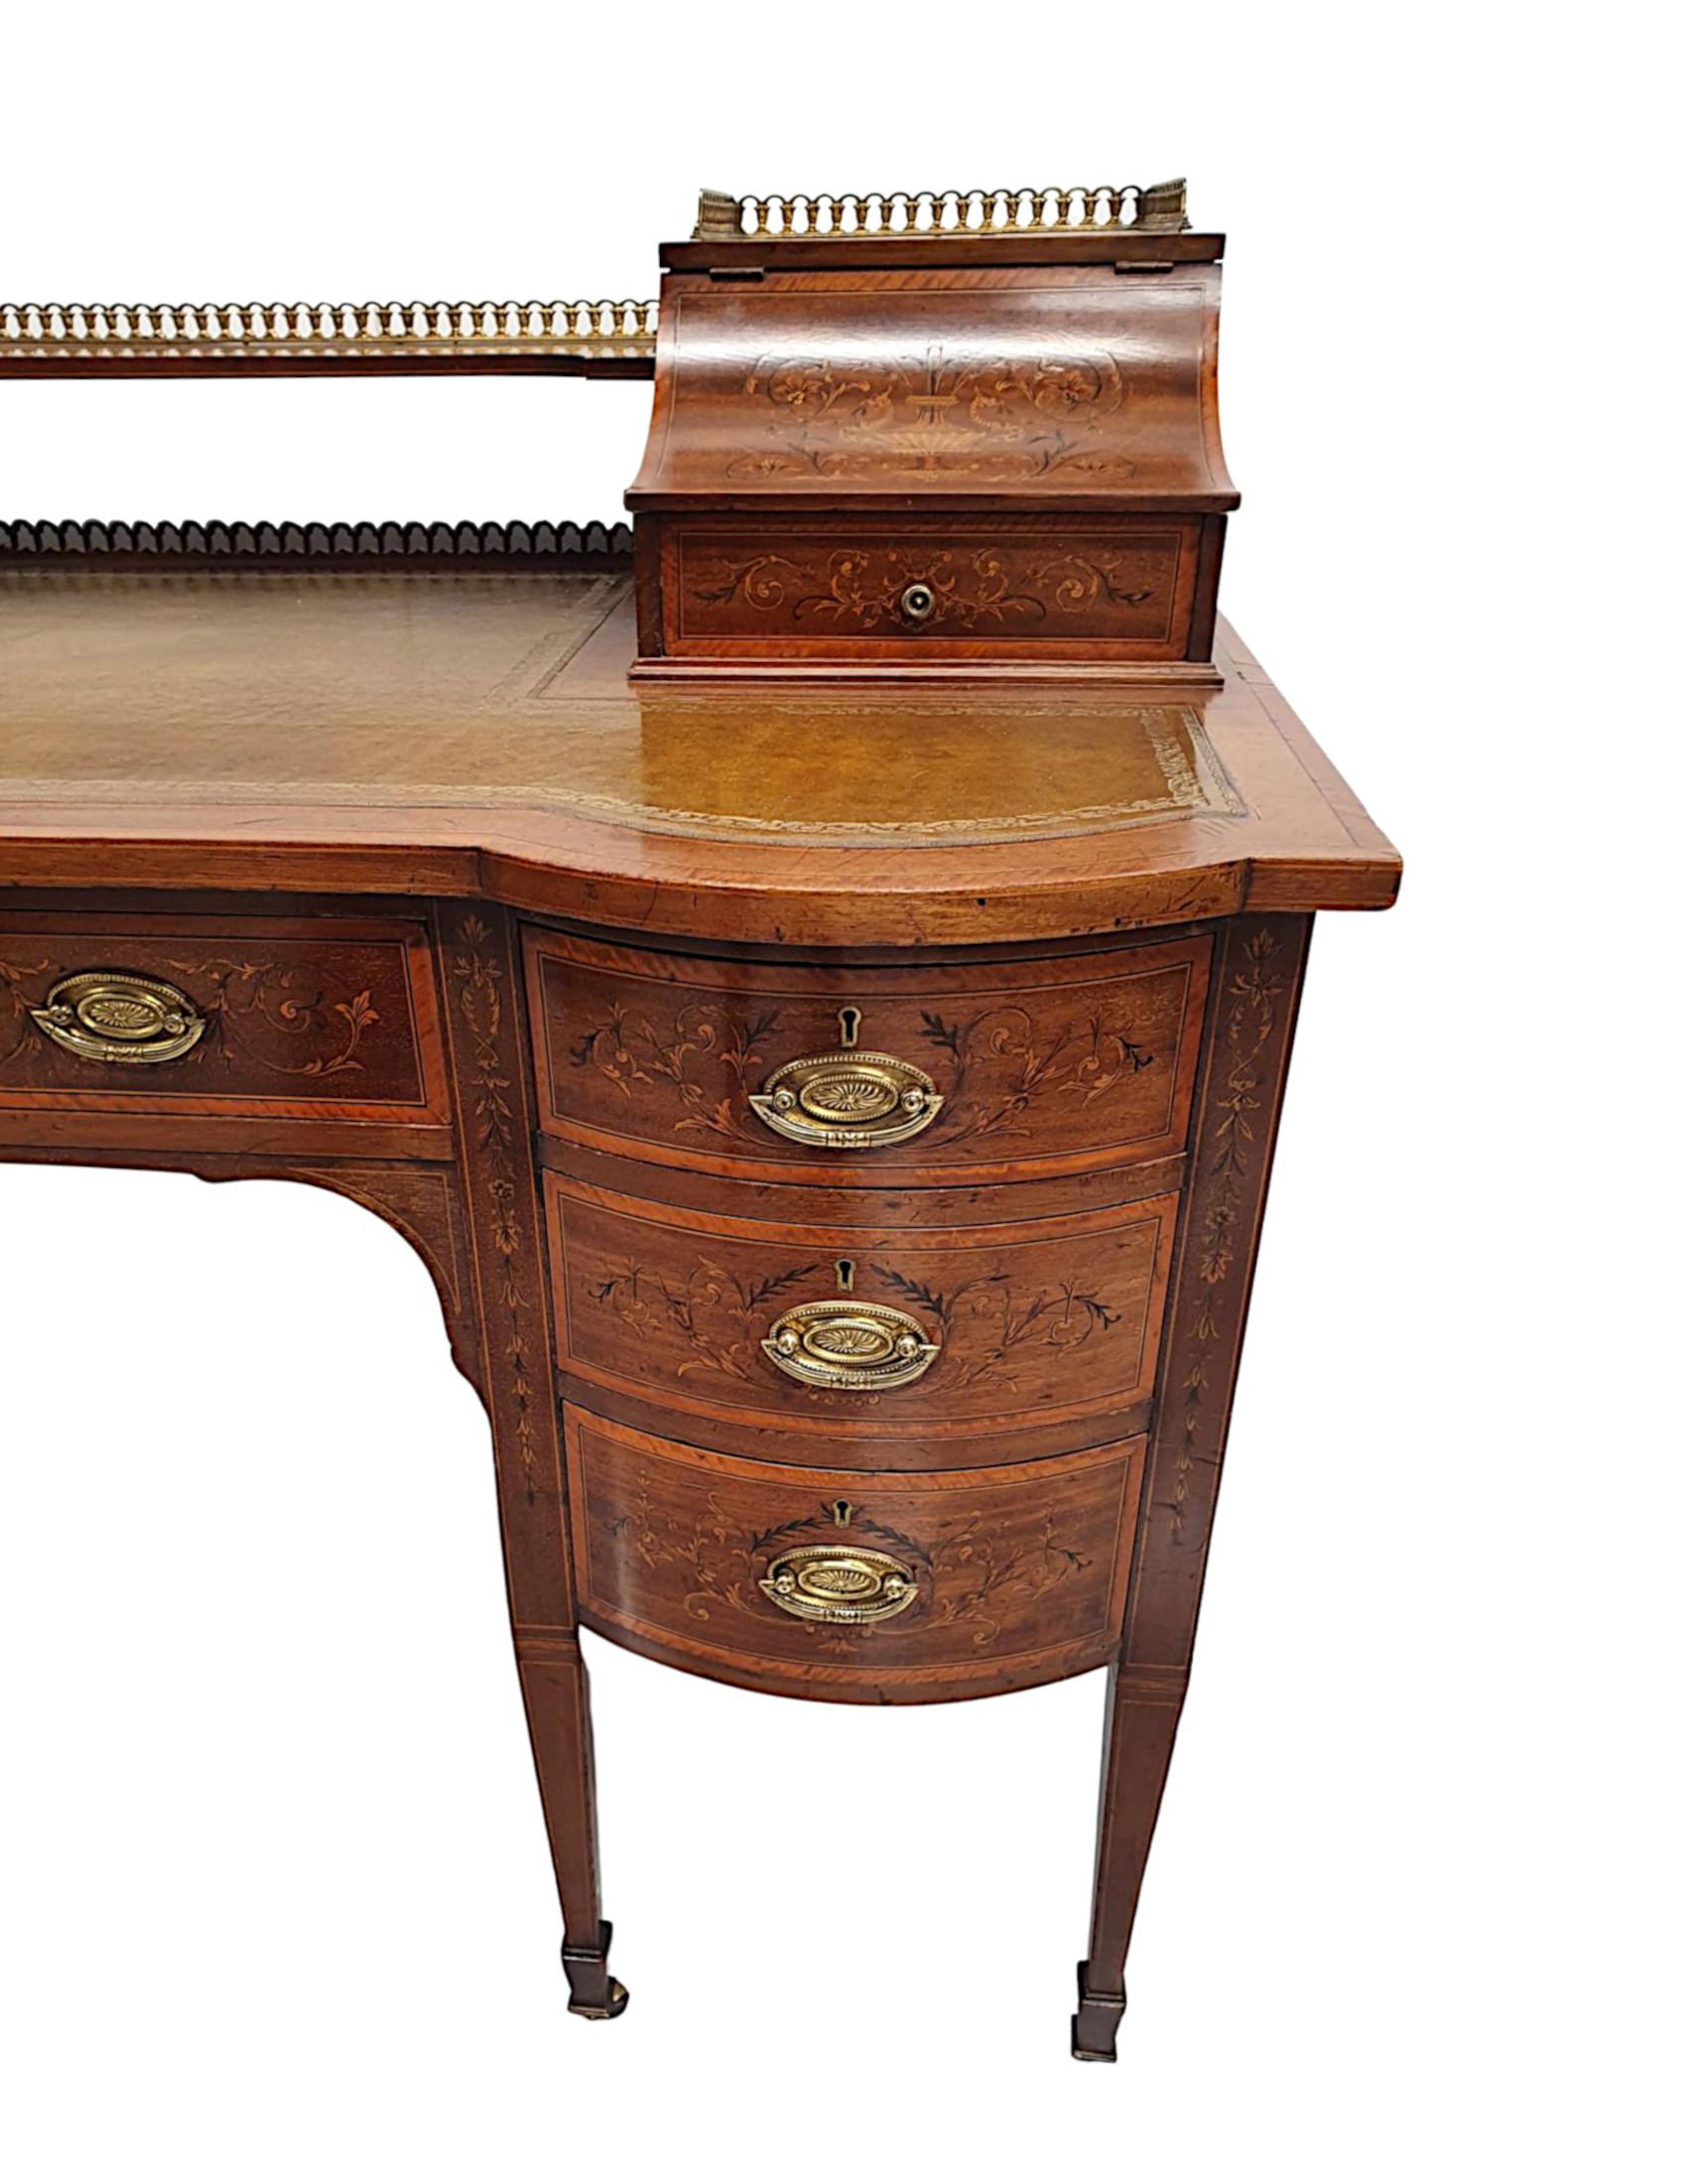 20th Century A Stunning Edwardian Desk in the Carlton House Style by Maple of London For Sale